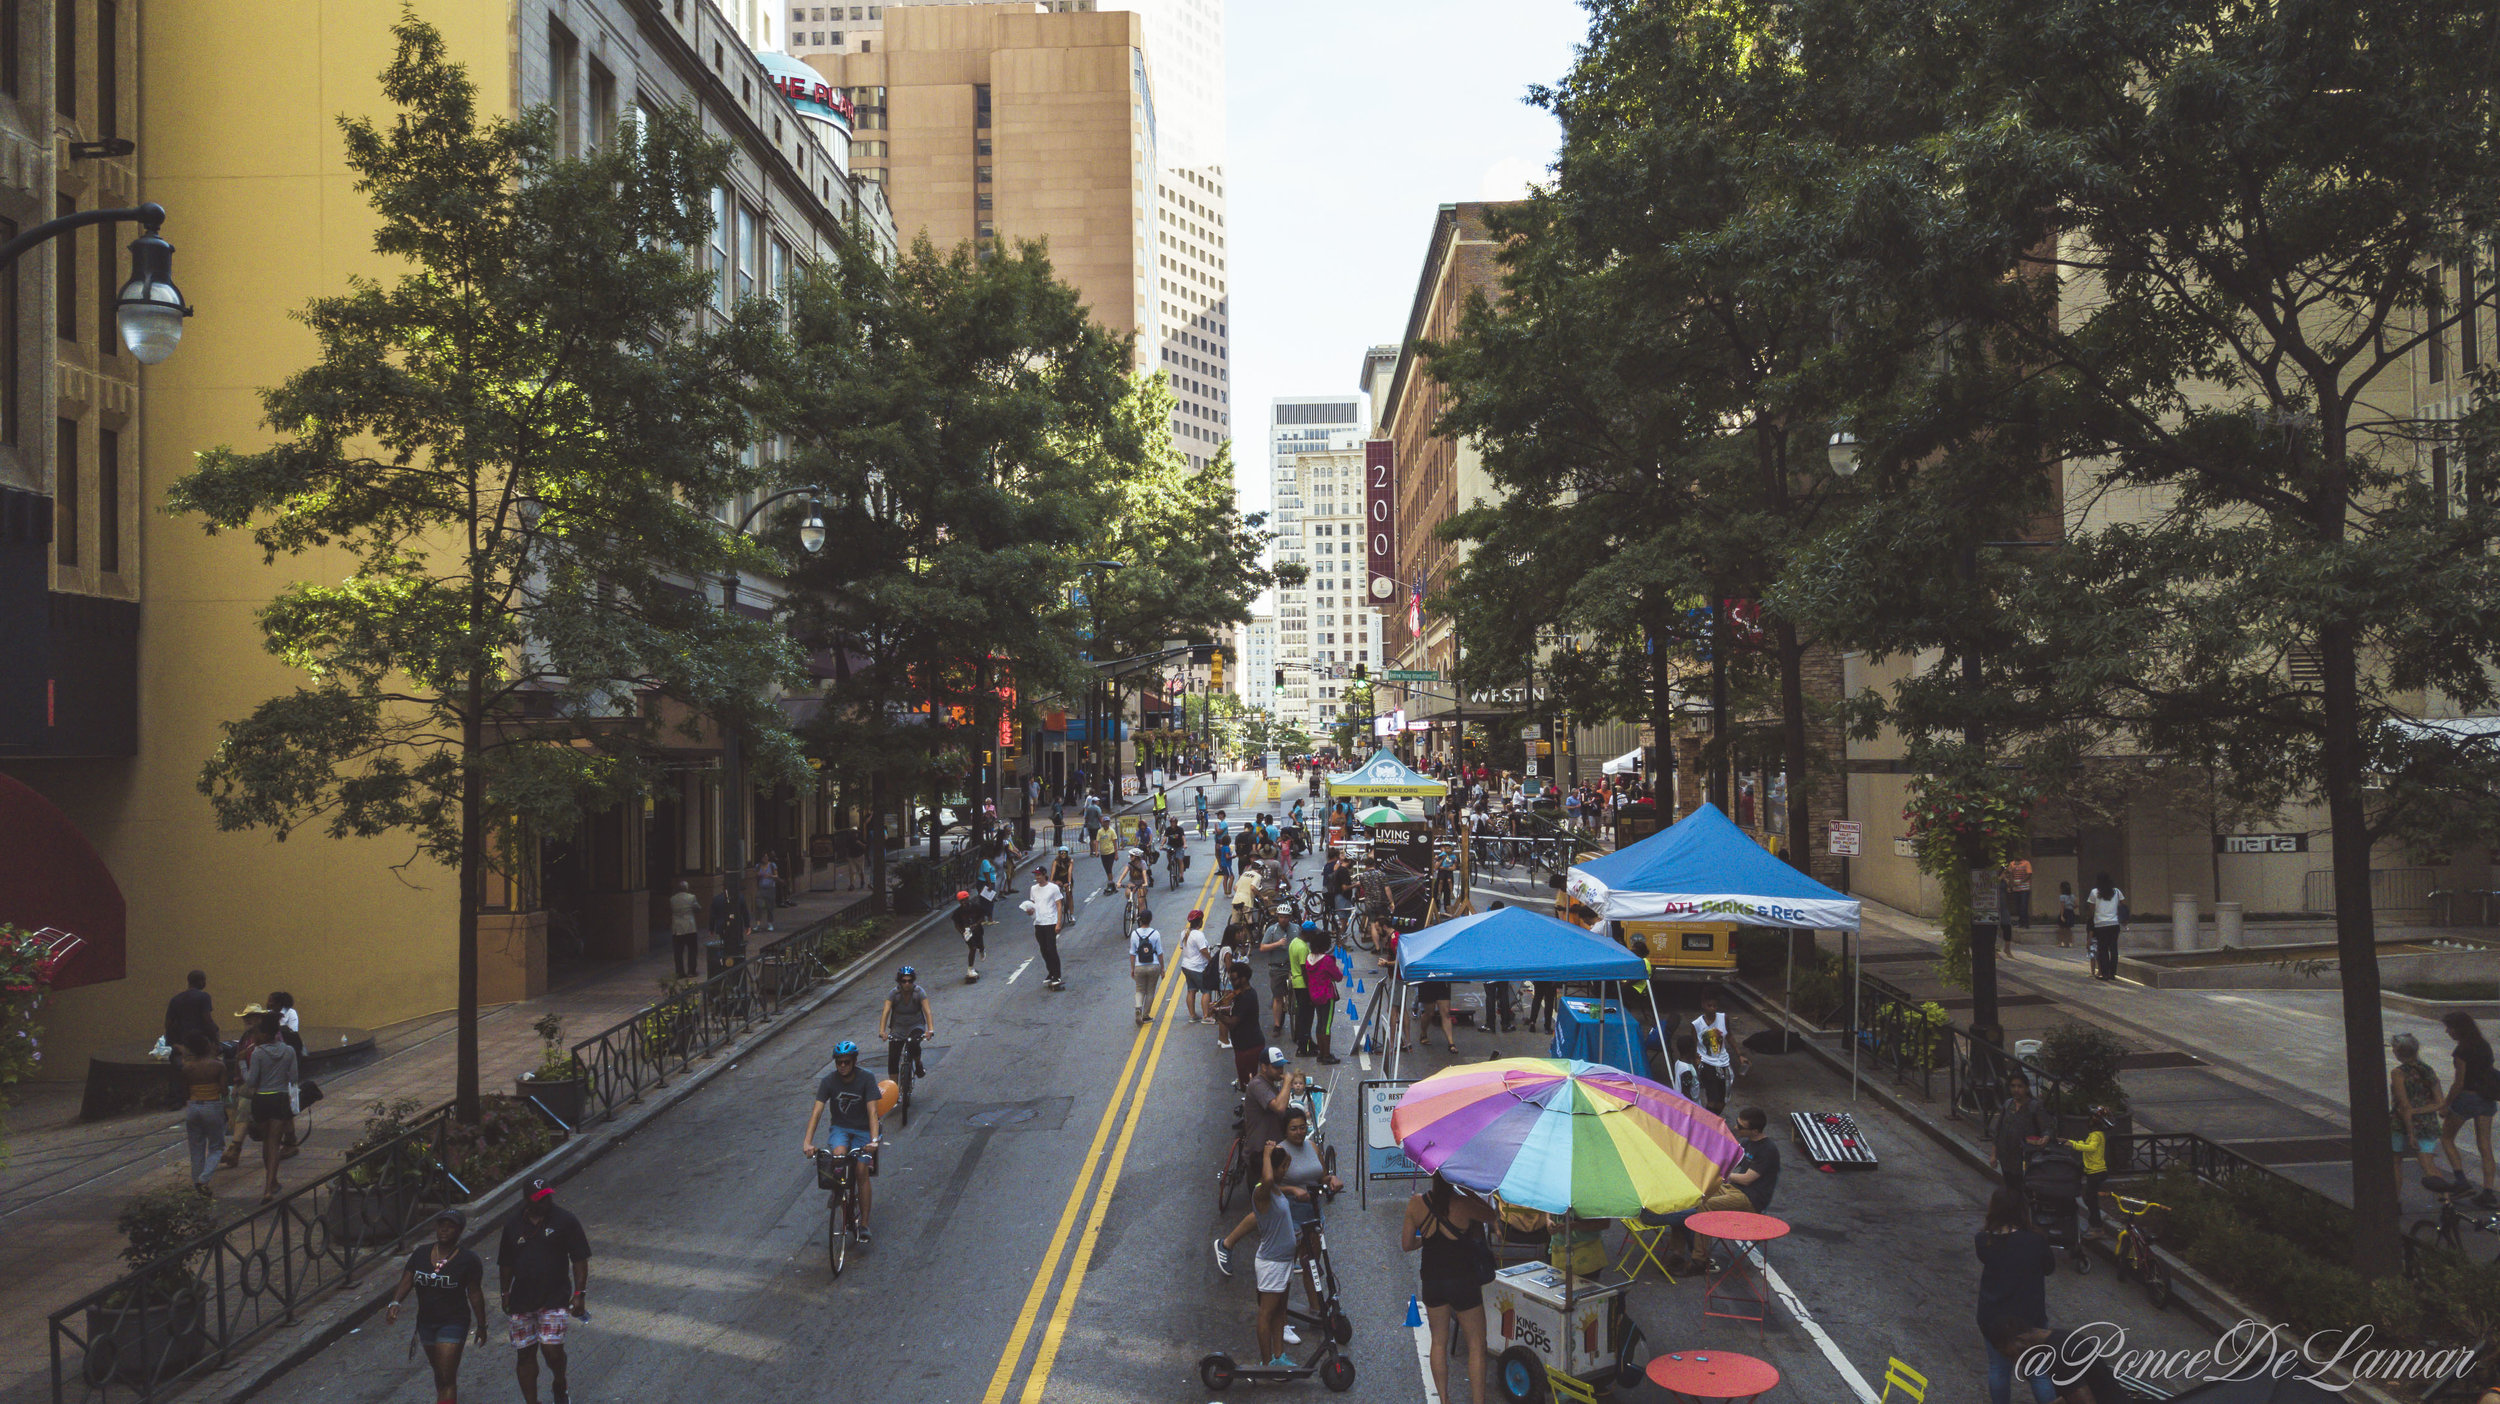 What You Need to Know About Atlanta's Famous Peachtree Streets